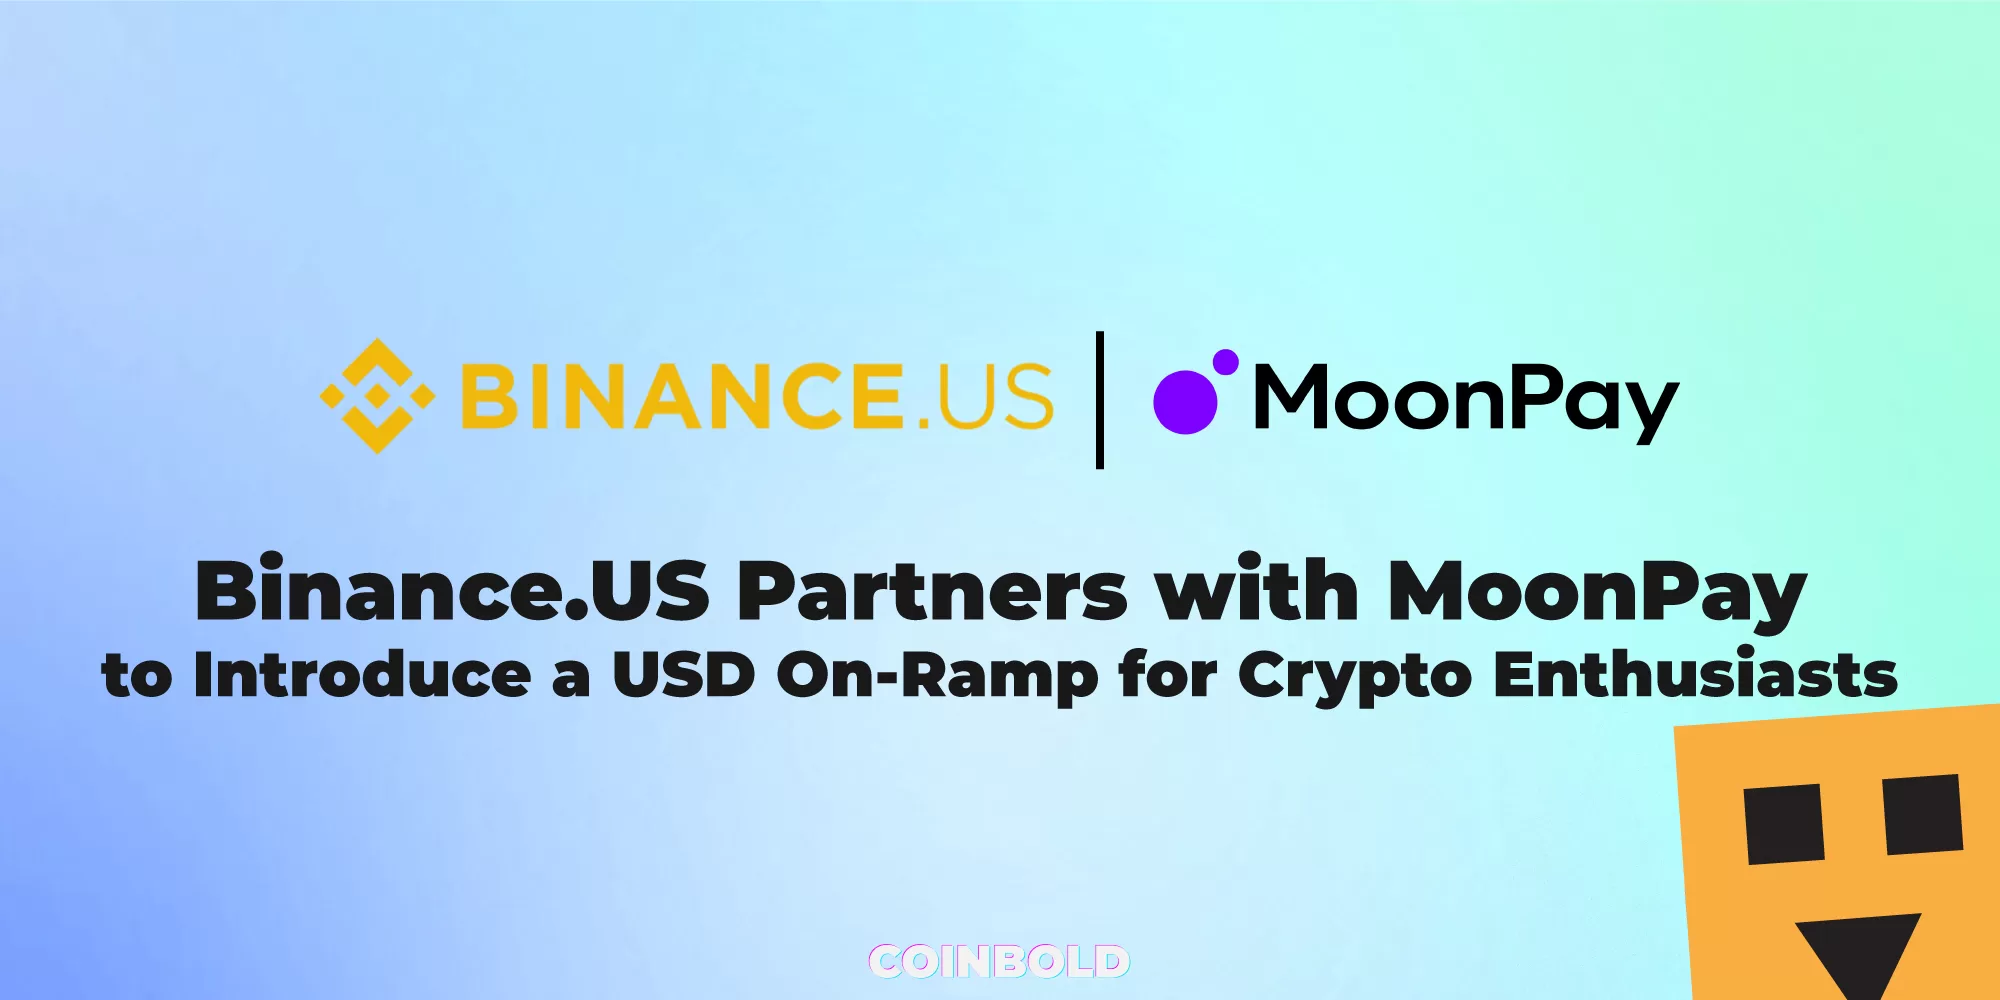 Binance.US Partners with MoonPay to Introduce a USD On Ramp for Crypto Enthusiasts